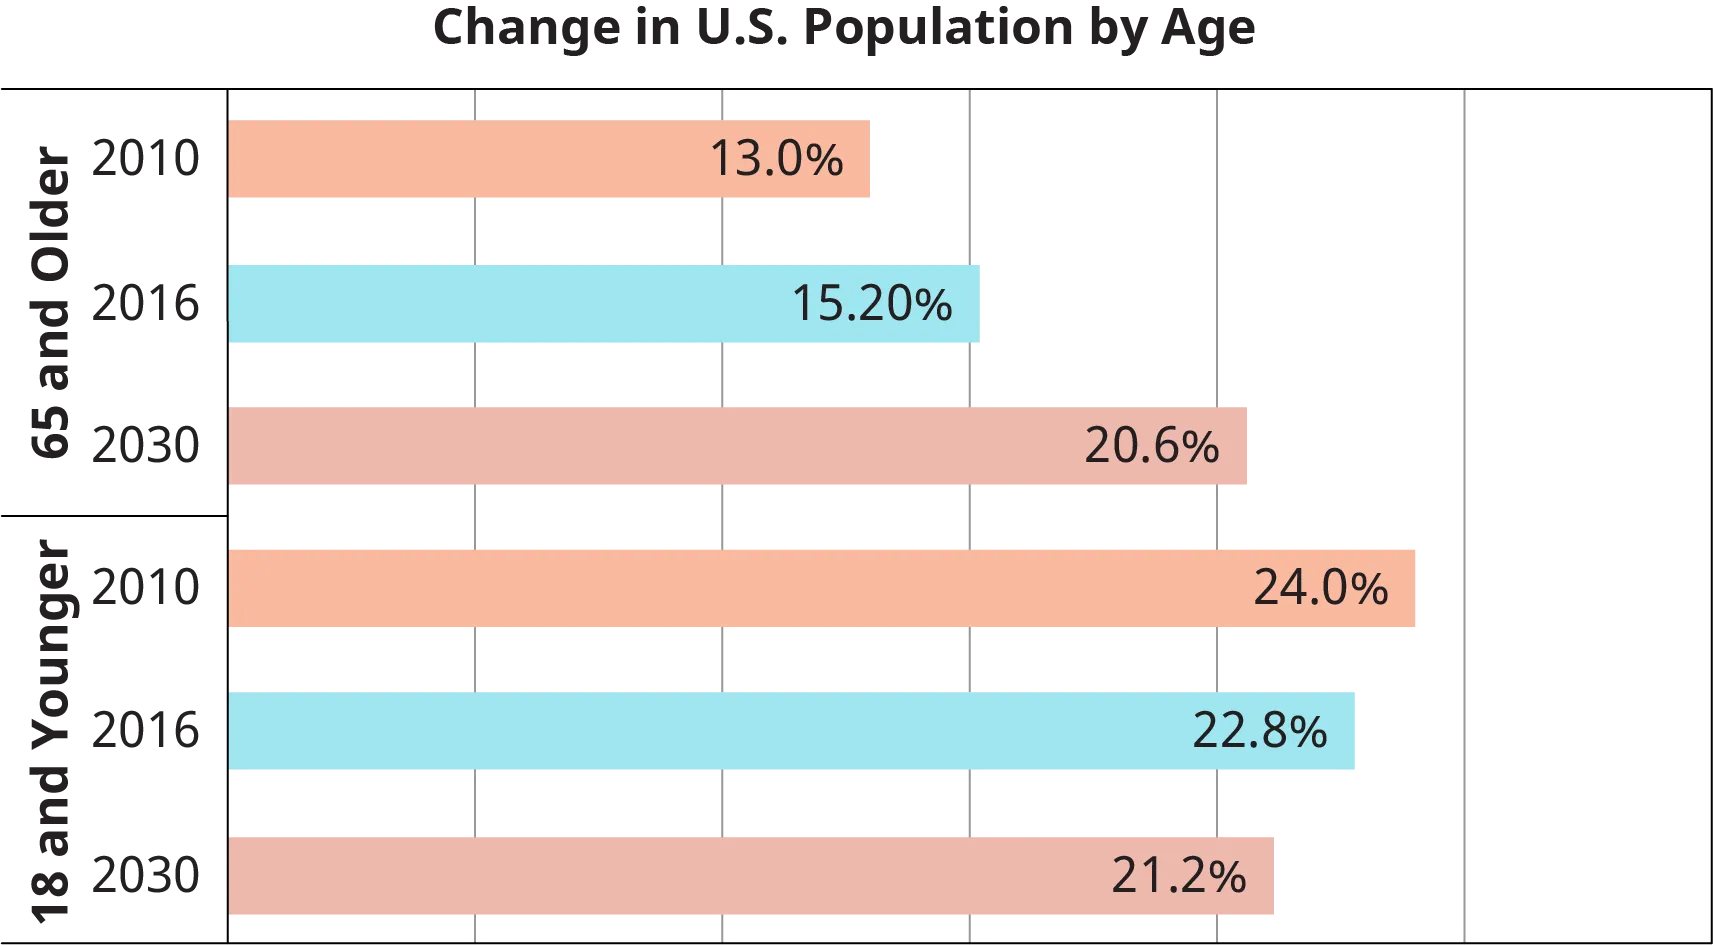 A horizontal bar graph titled “Change in U.S. Population by Age” is shown.